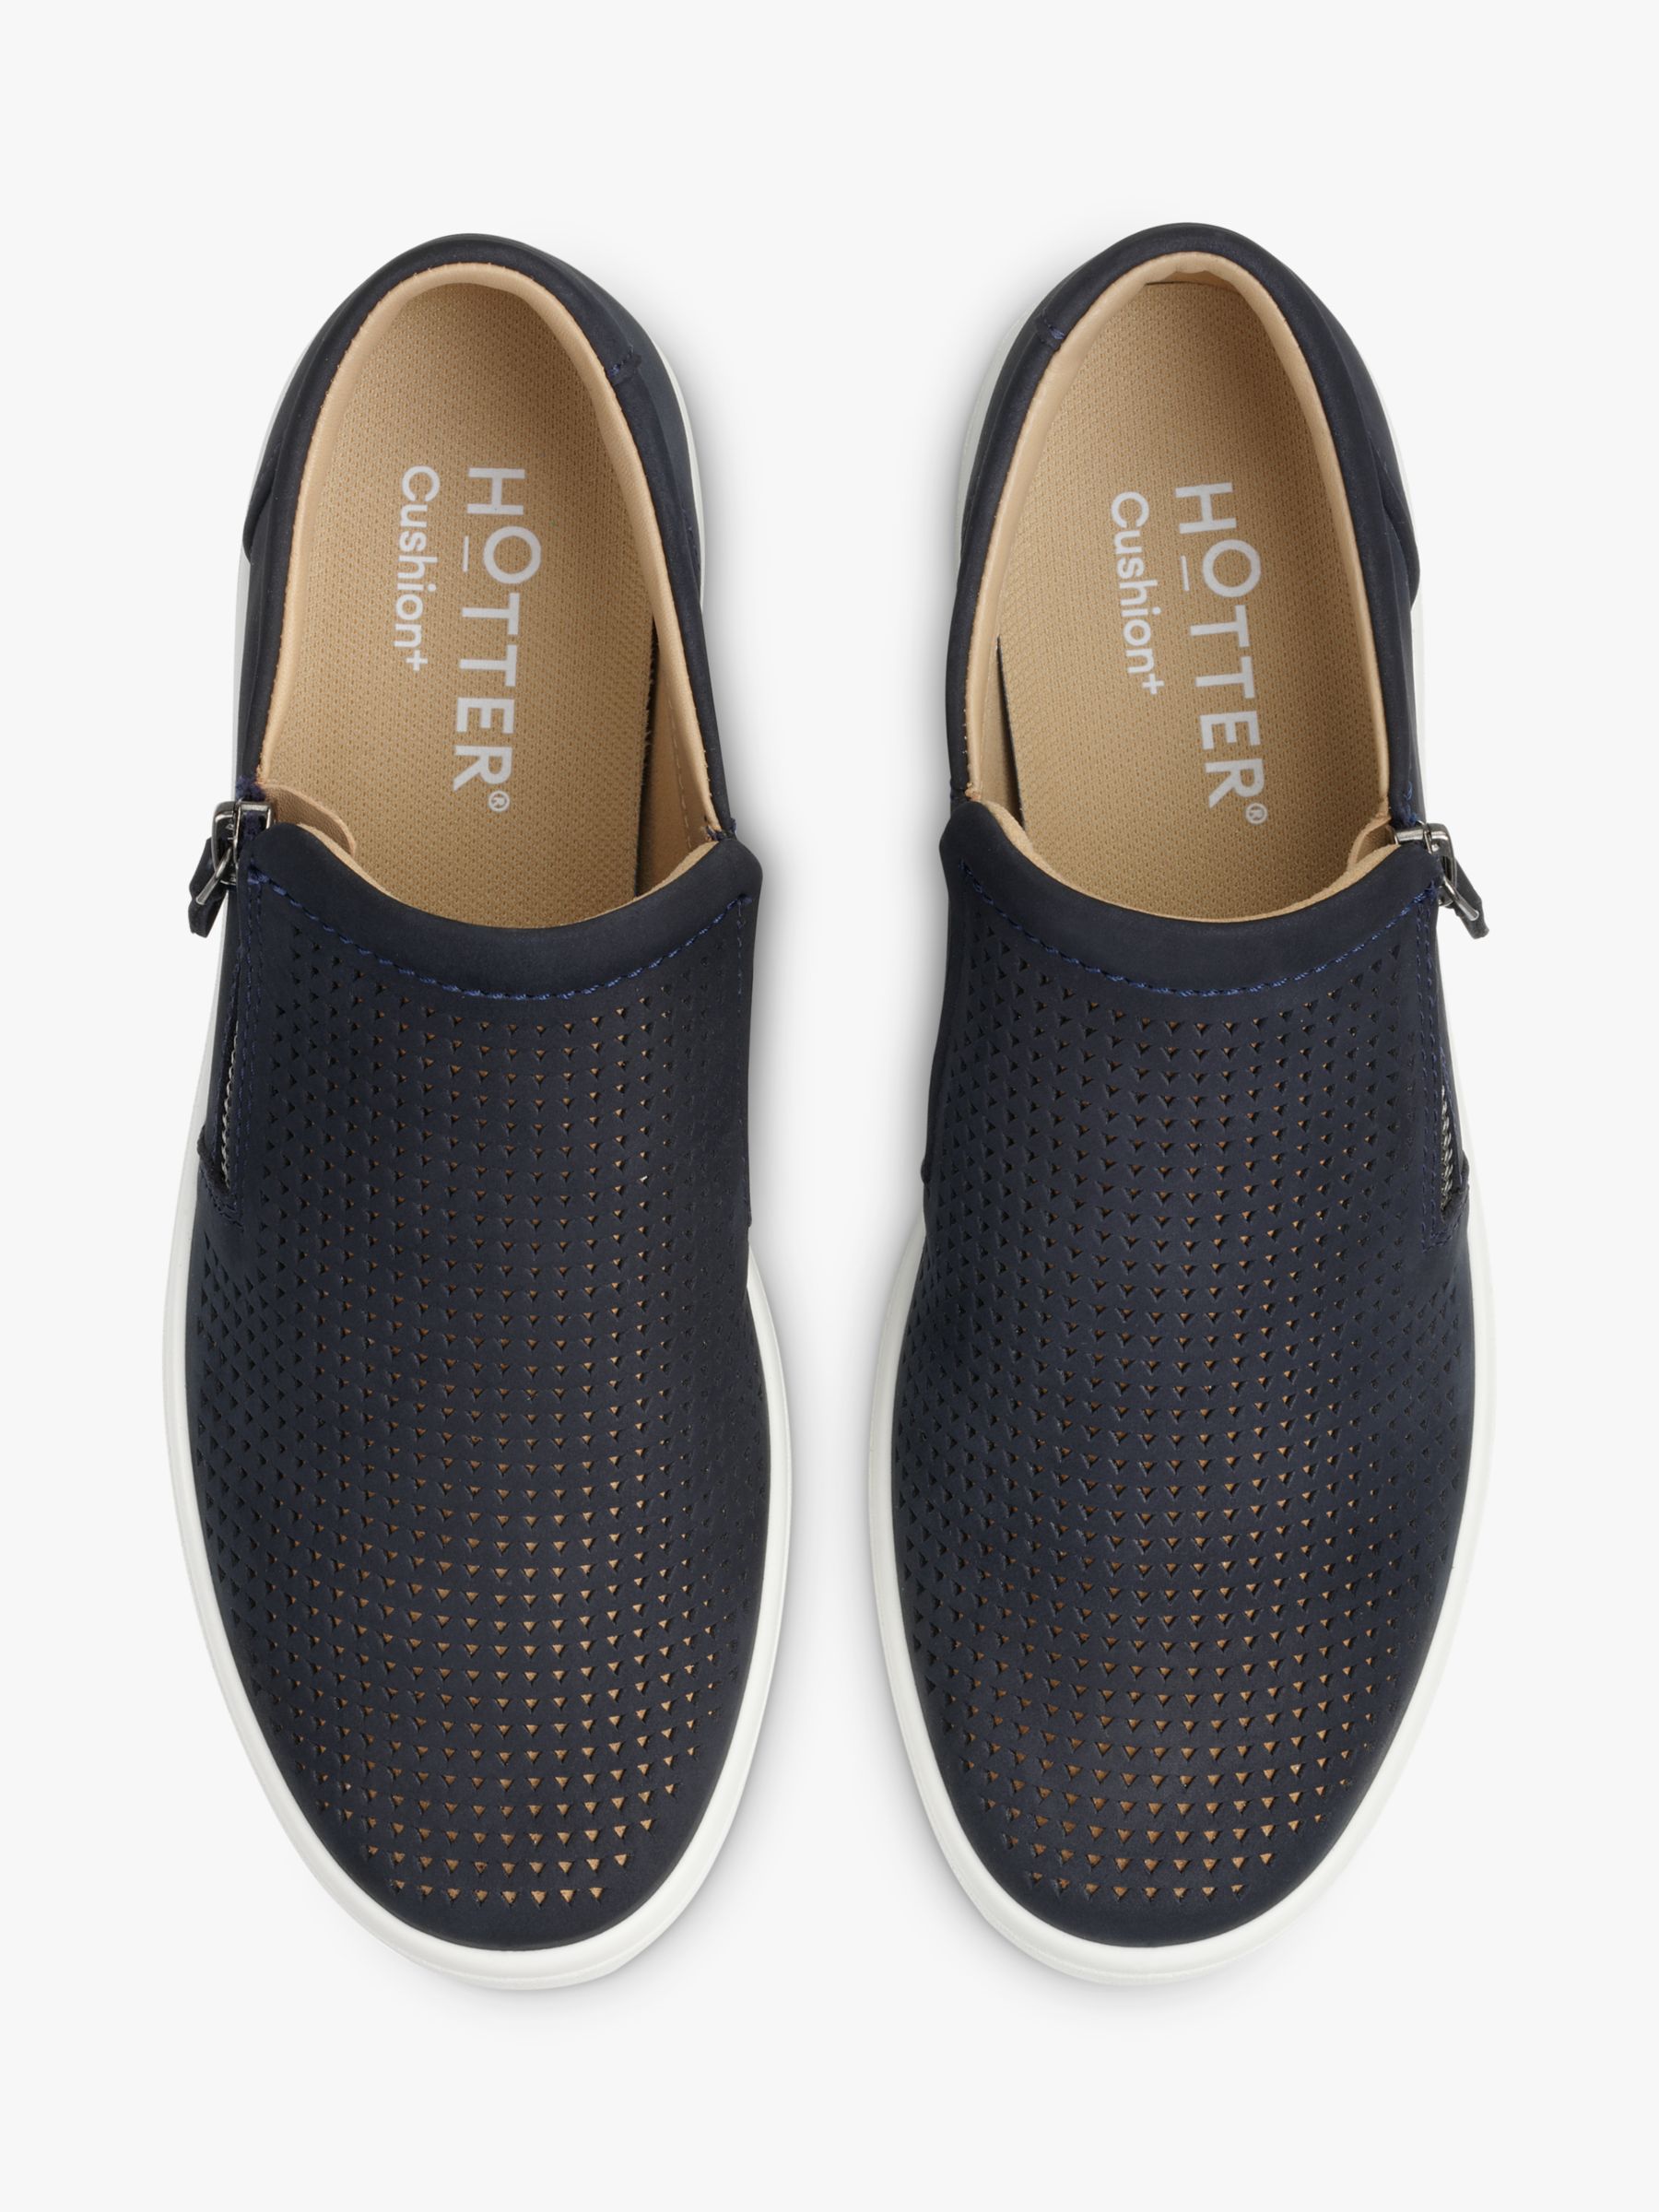 Buy Hotter Daisy Extra Wide Fit Deck Shoes, Navy Online at johnlewis.com